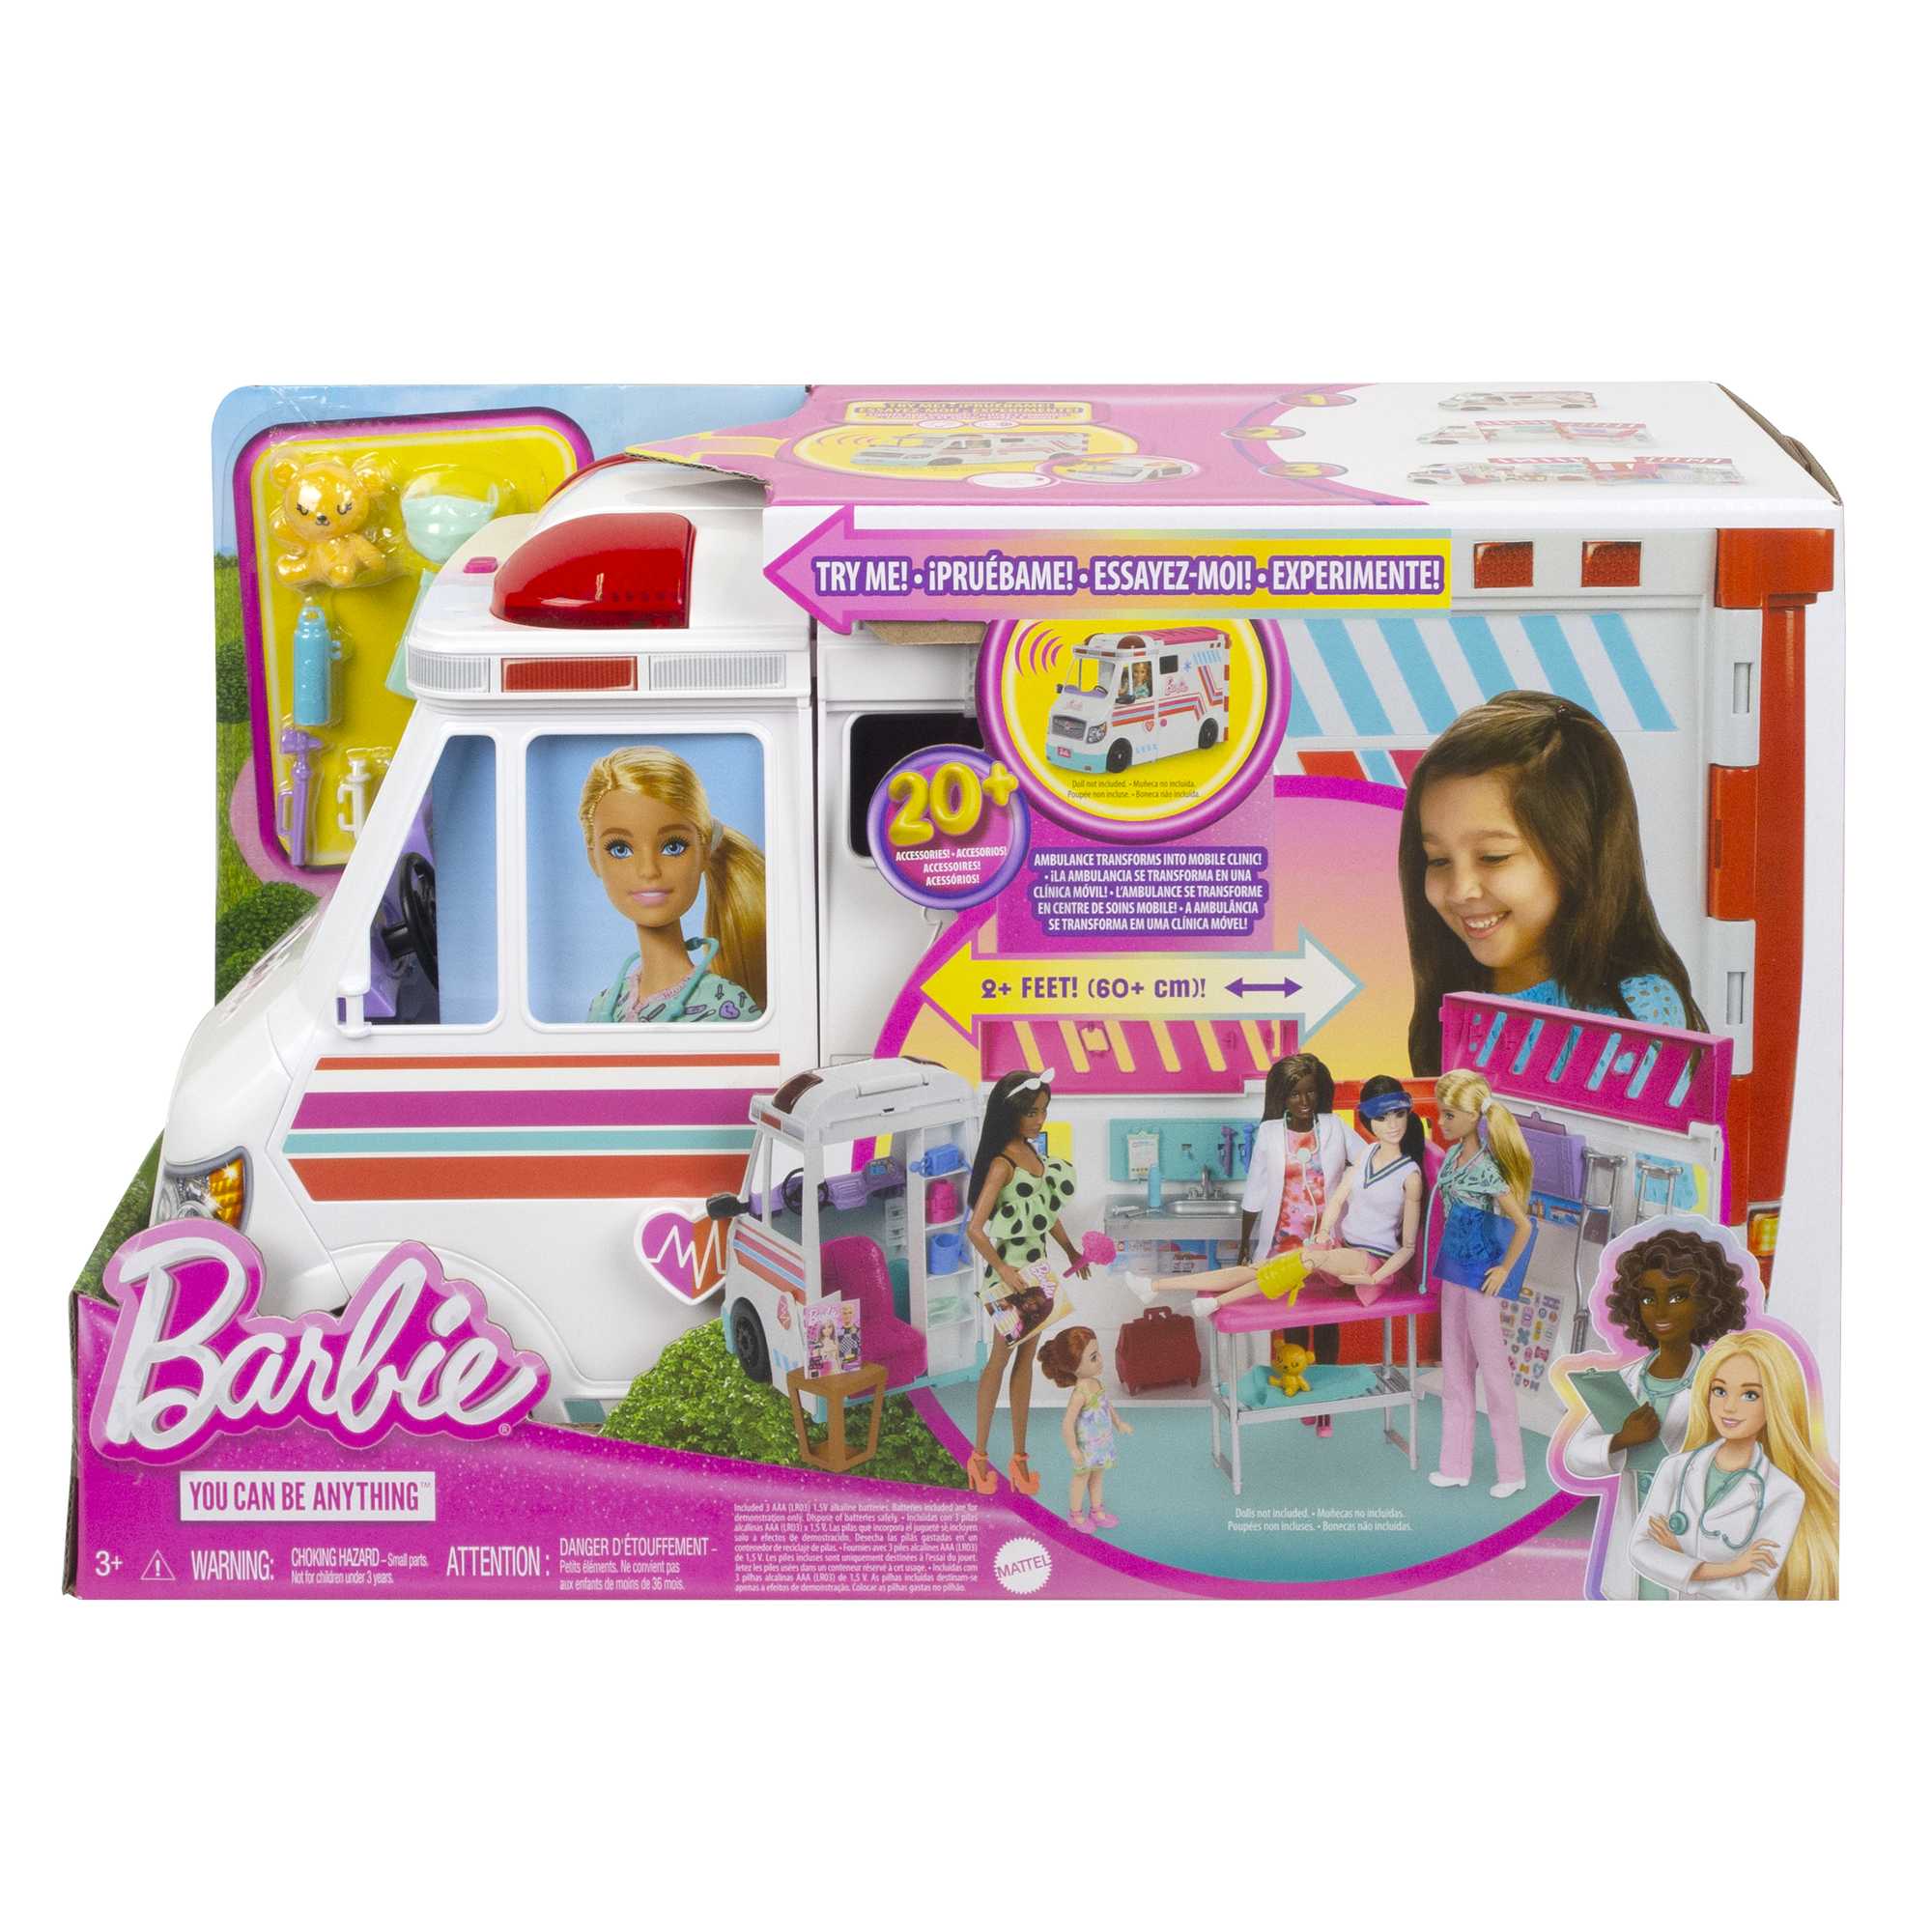 Barbie Toys, Transforming And Clinic Playset, 20+ Accessories, Care Clinic | HKT79 | MATTEL